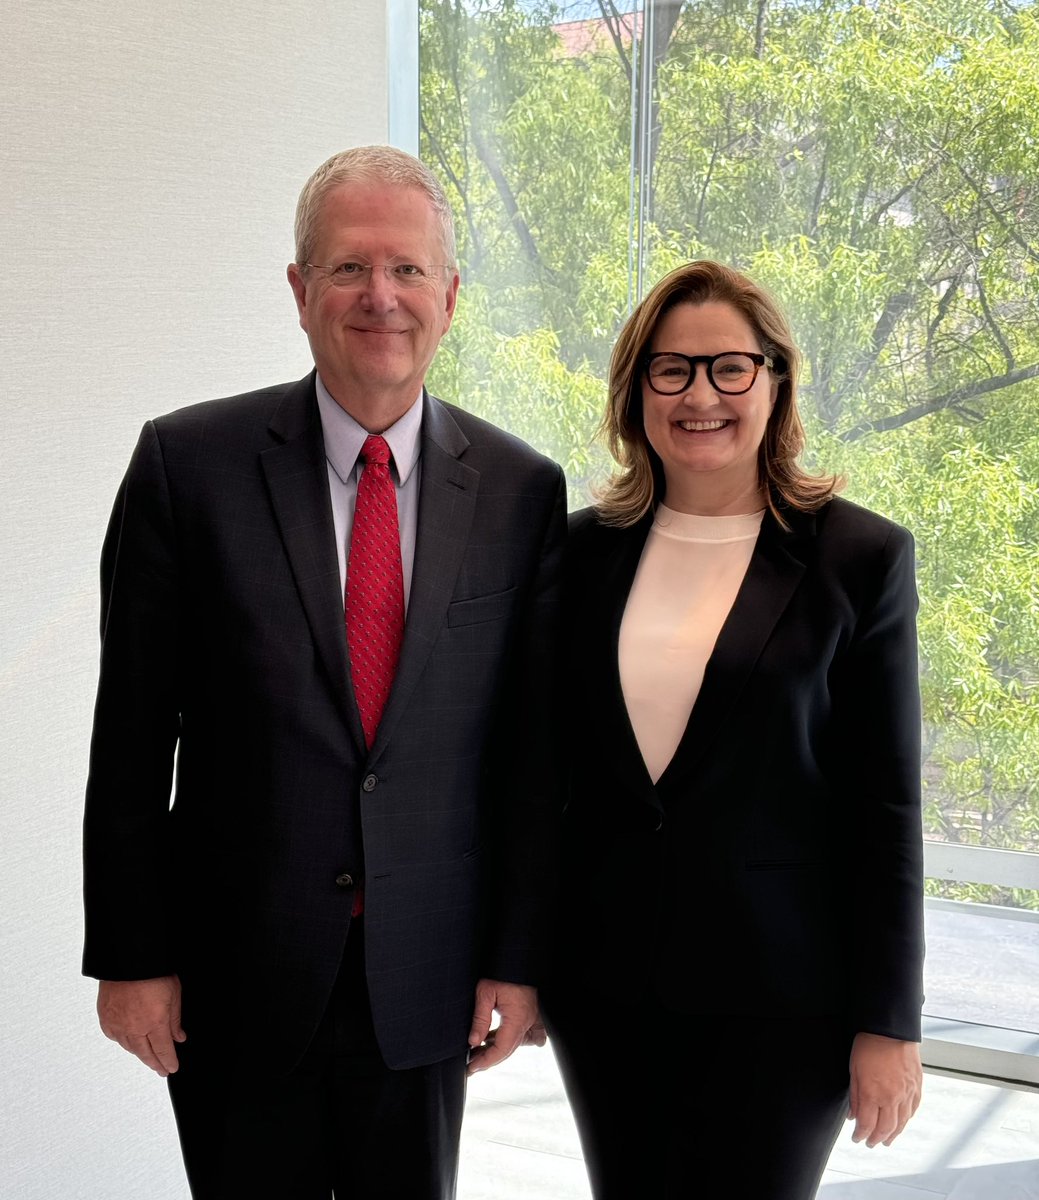 I recently had the opportunity to chat with @gethotwire CEO Kristin Johnson. They are a fantastic @ACAConnects member bringing a vital service to America.